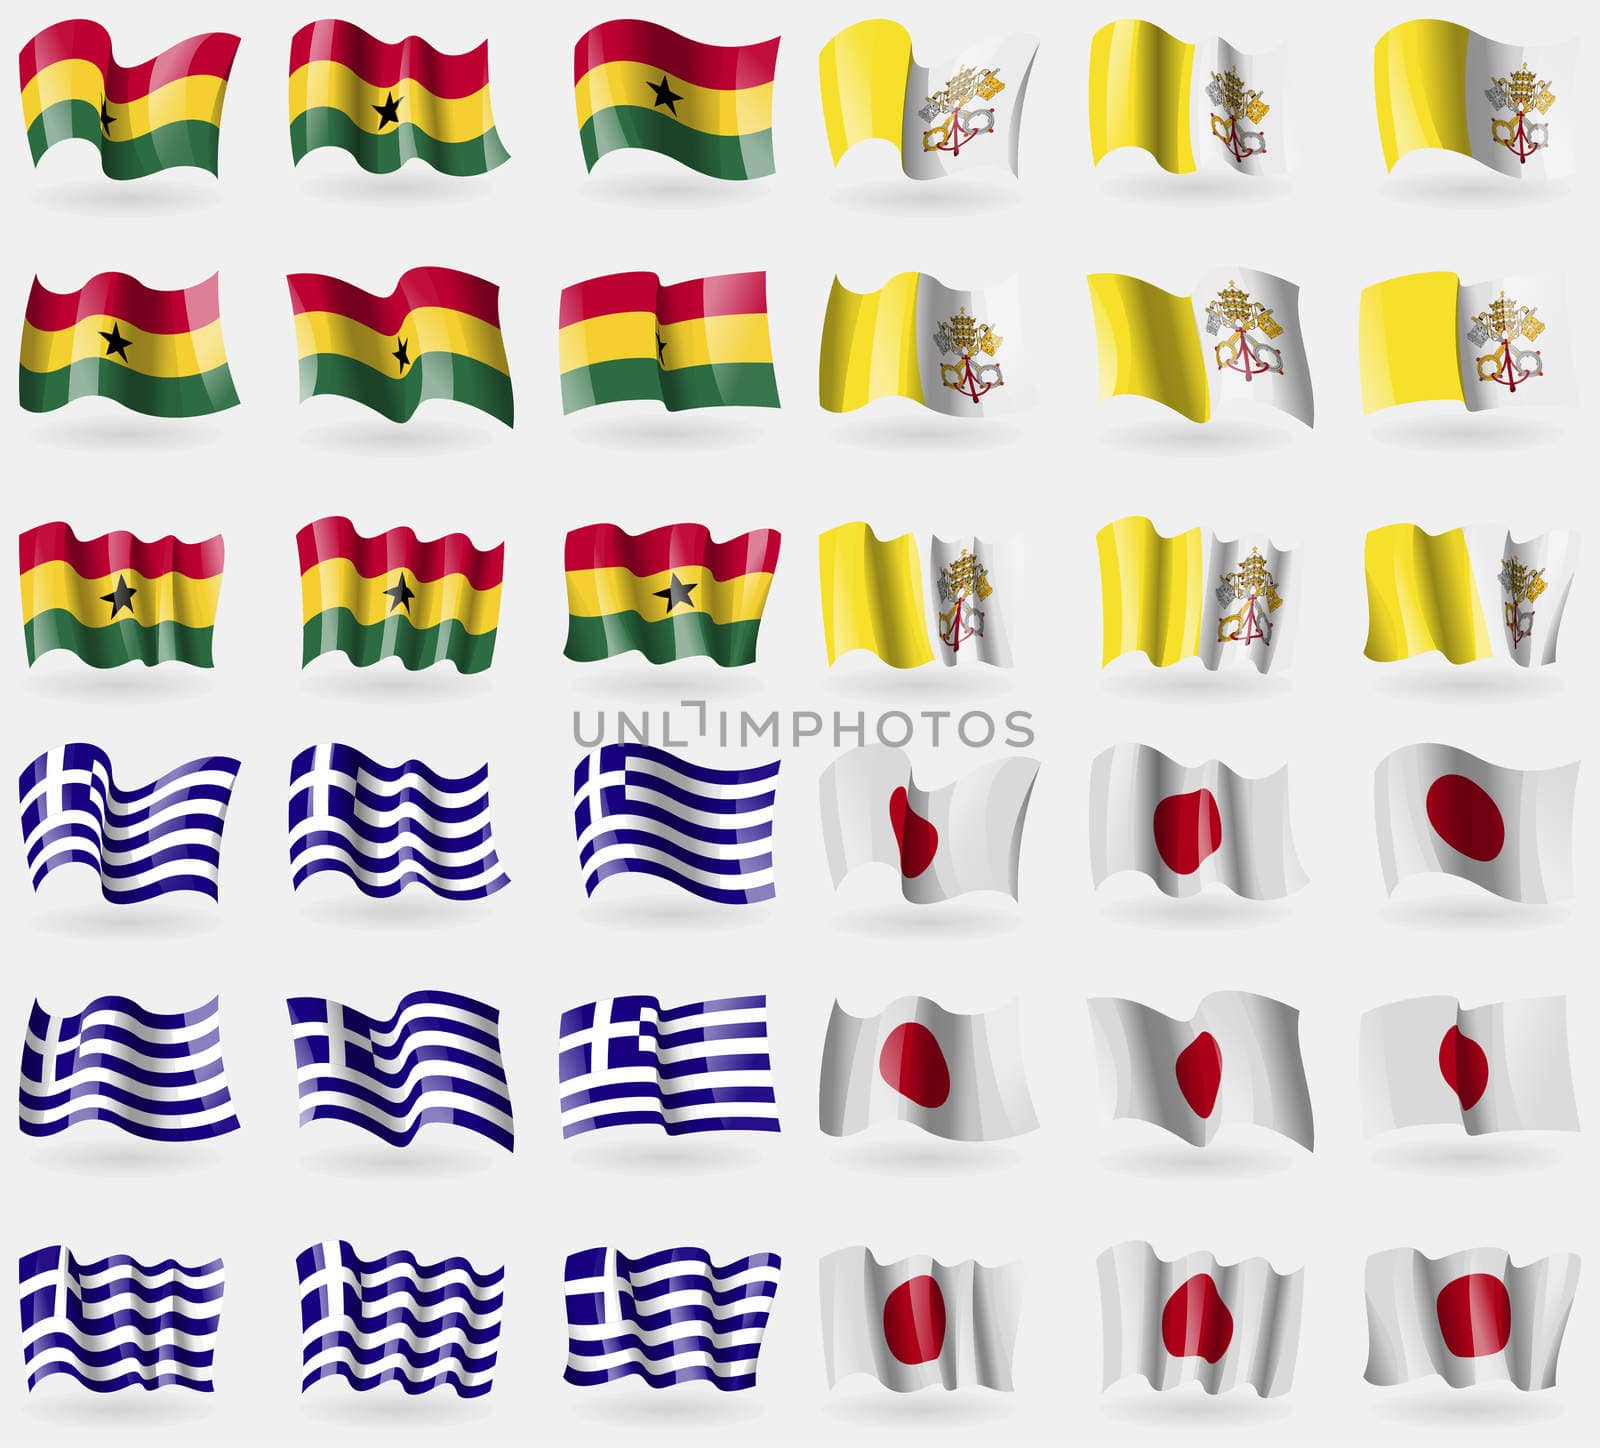 Ghana, Vatican CityHoly See, Greece, Japan. Set of 36 flags of the countries of the world. illustration